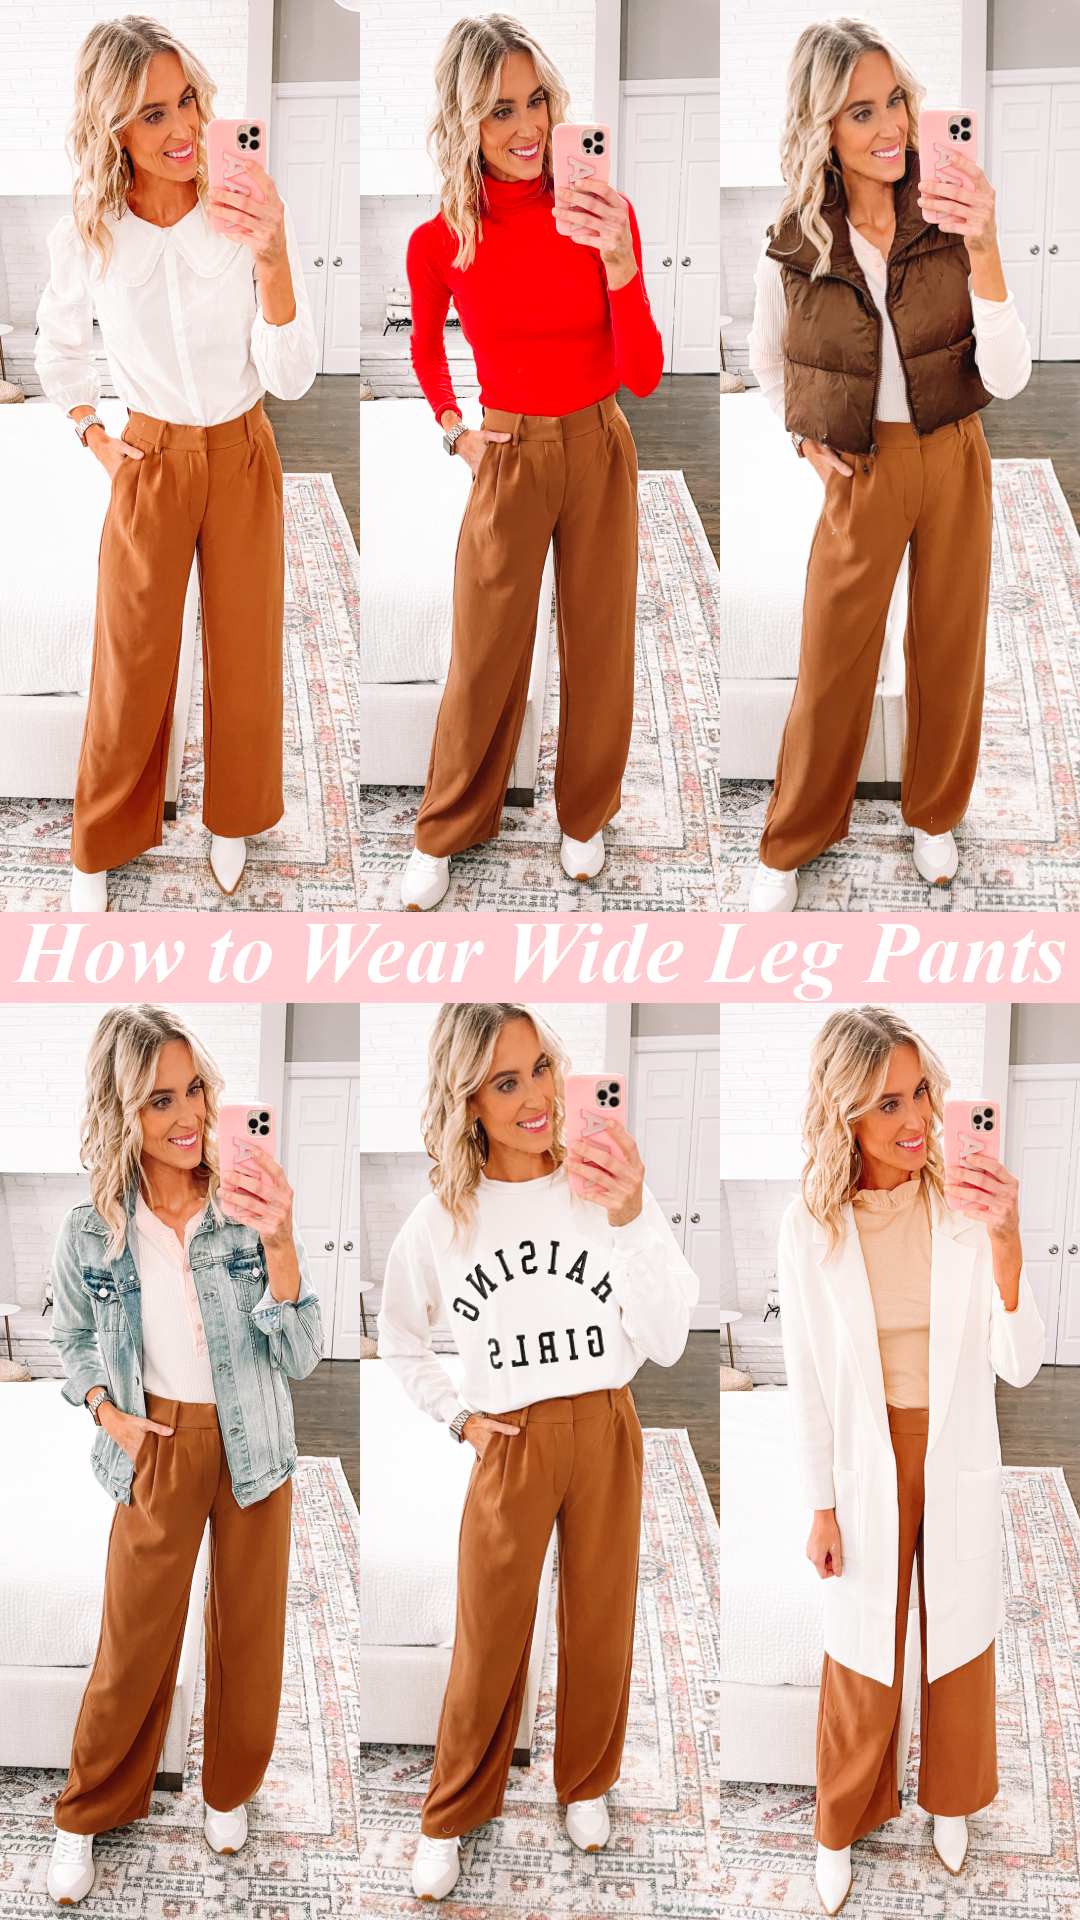 https://www.straightastyleblog.com/wp-content/uploads/2022/12/how-to-wear-wide-leg-pants-pin.png